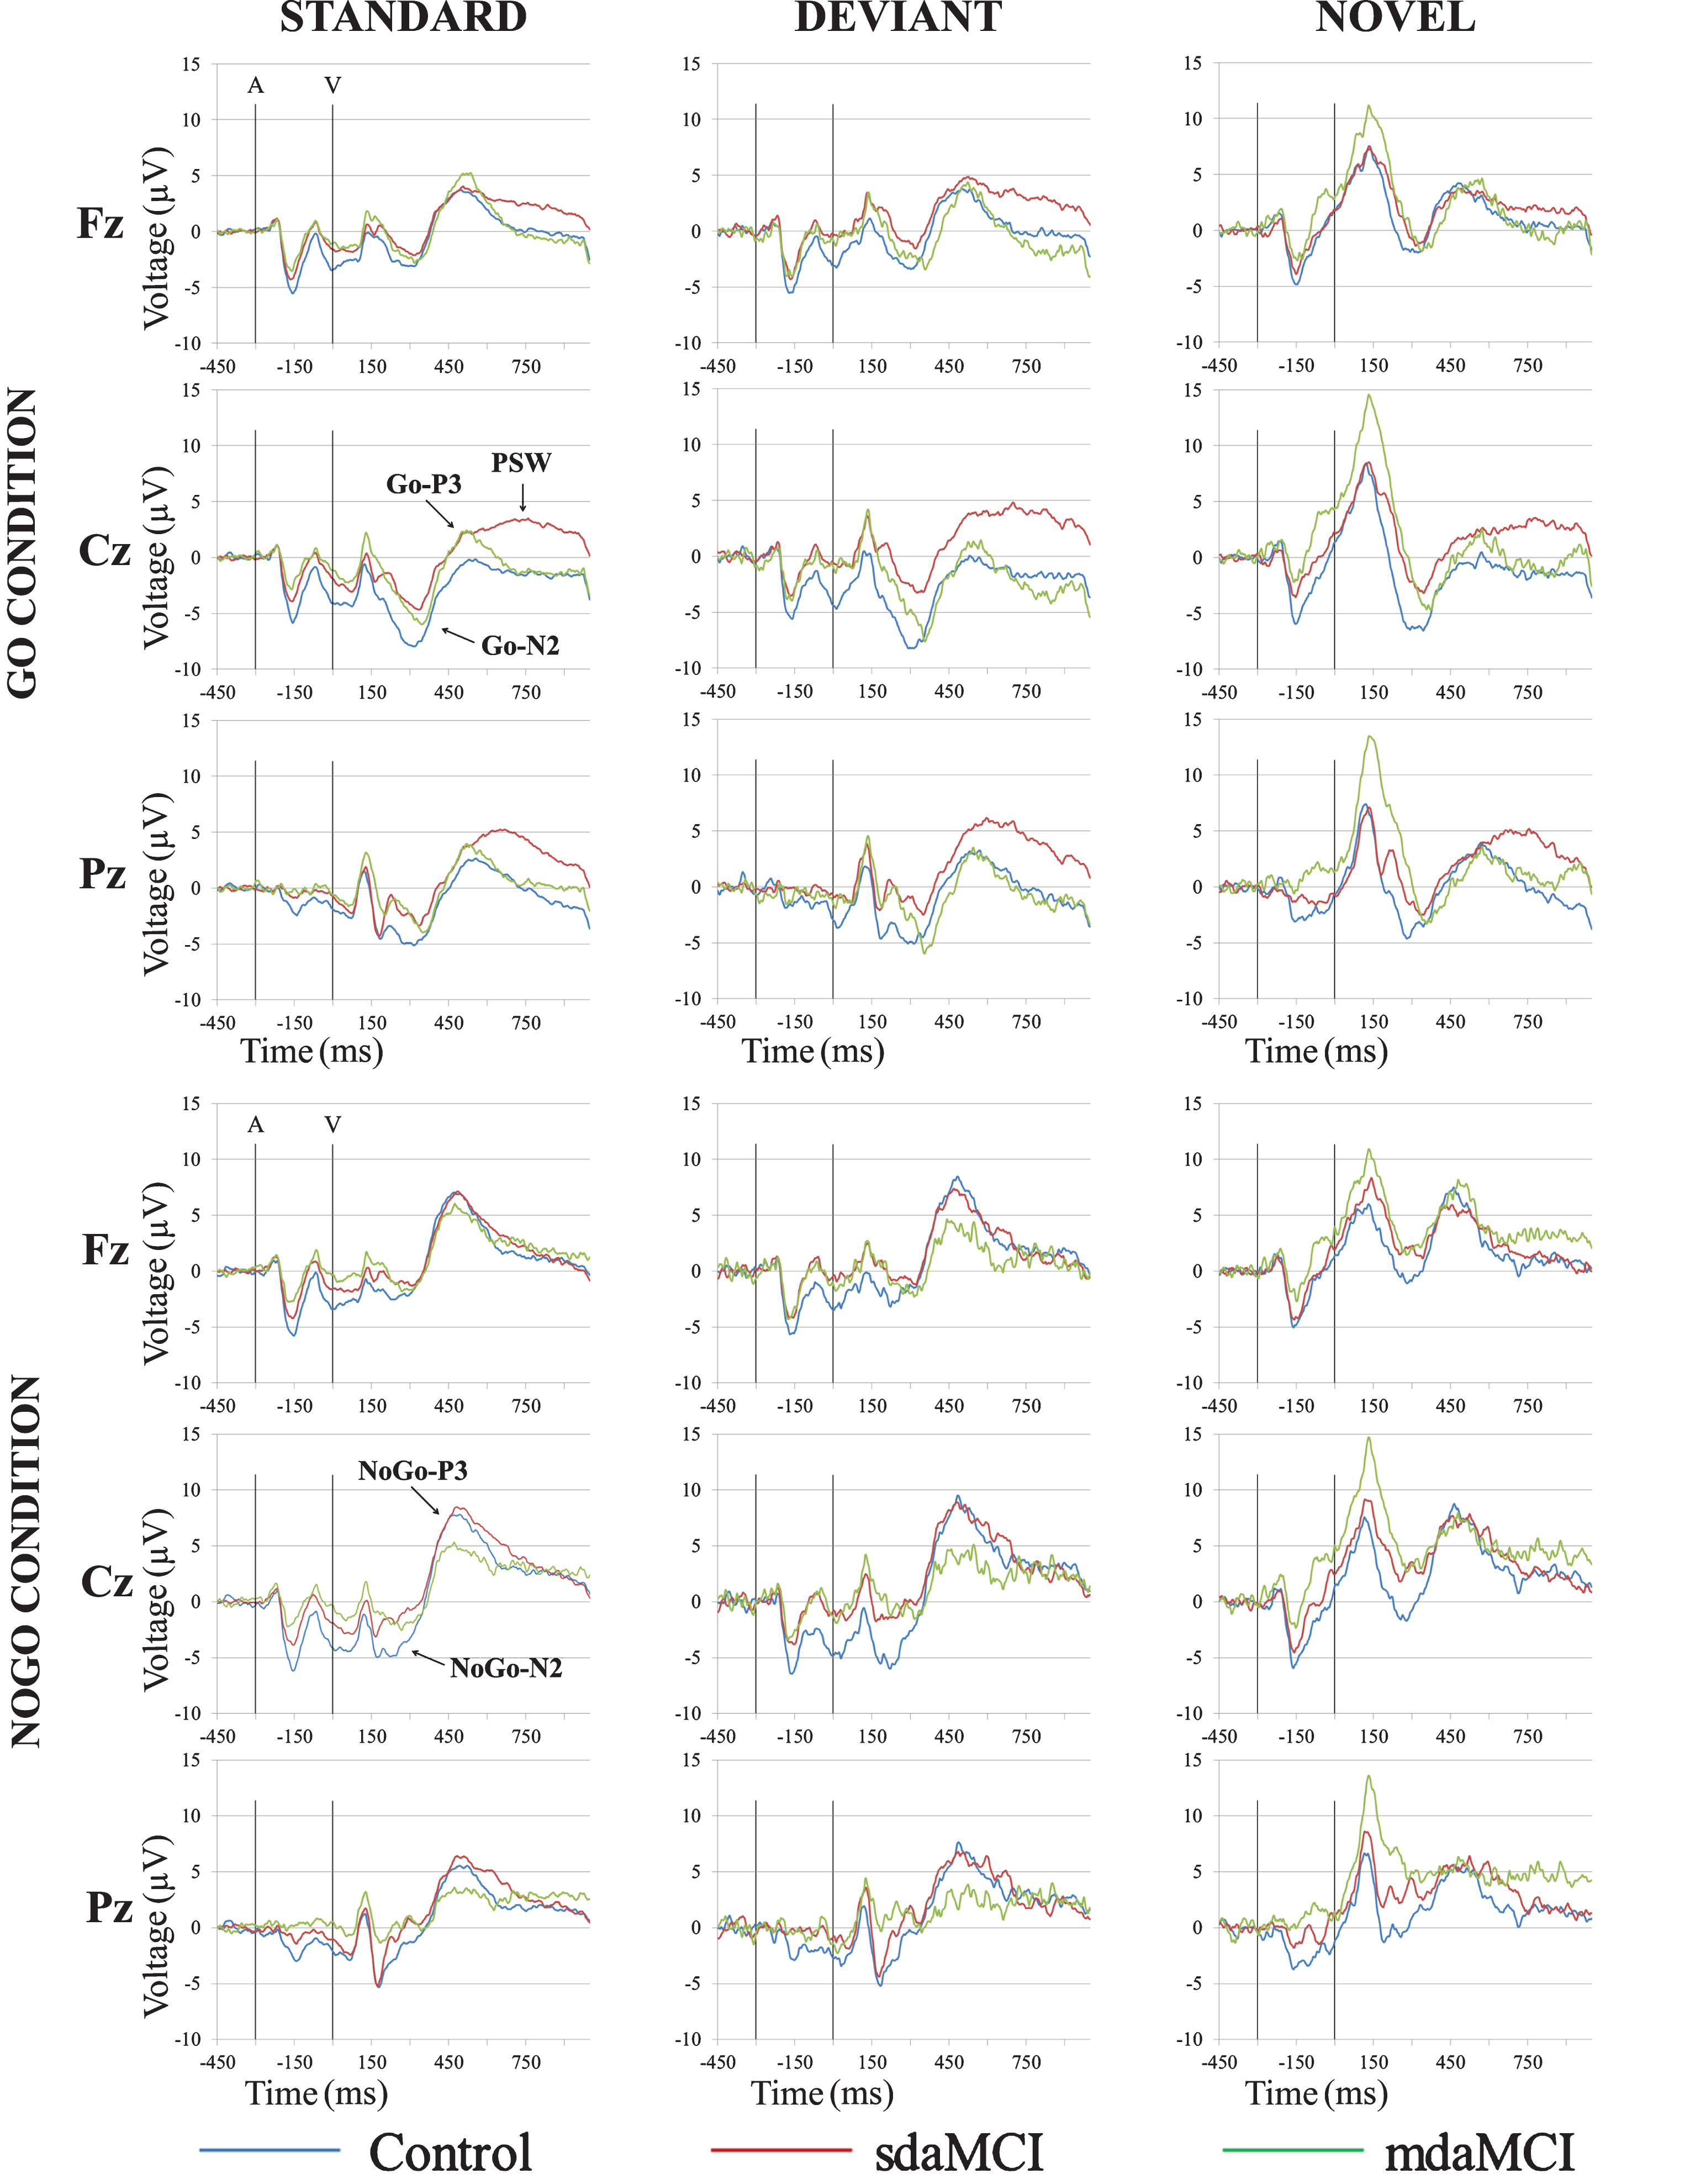 Grand-average event-related potential waveforms, for the Control (blue line), sdaMCI (red line), and mdaMCI (green line) groups, in the Standard-Go, Deviant-Go and Novel-Go conditions (upper panel), and Standard-NoGo, Deviant-NoGo and Novel-NoGo conditions (lower panel), at Fz, Cz, and Pz electrode sites.